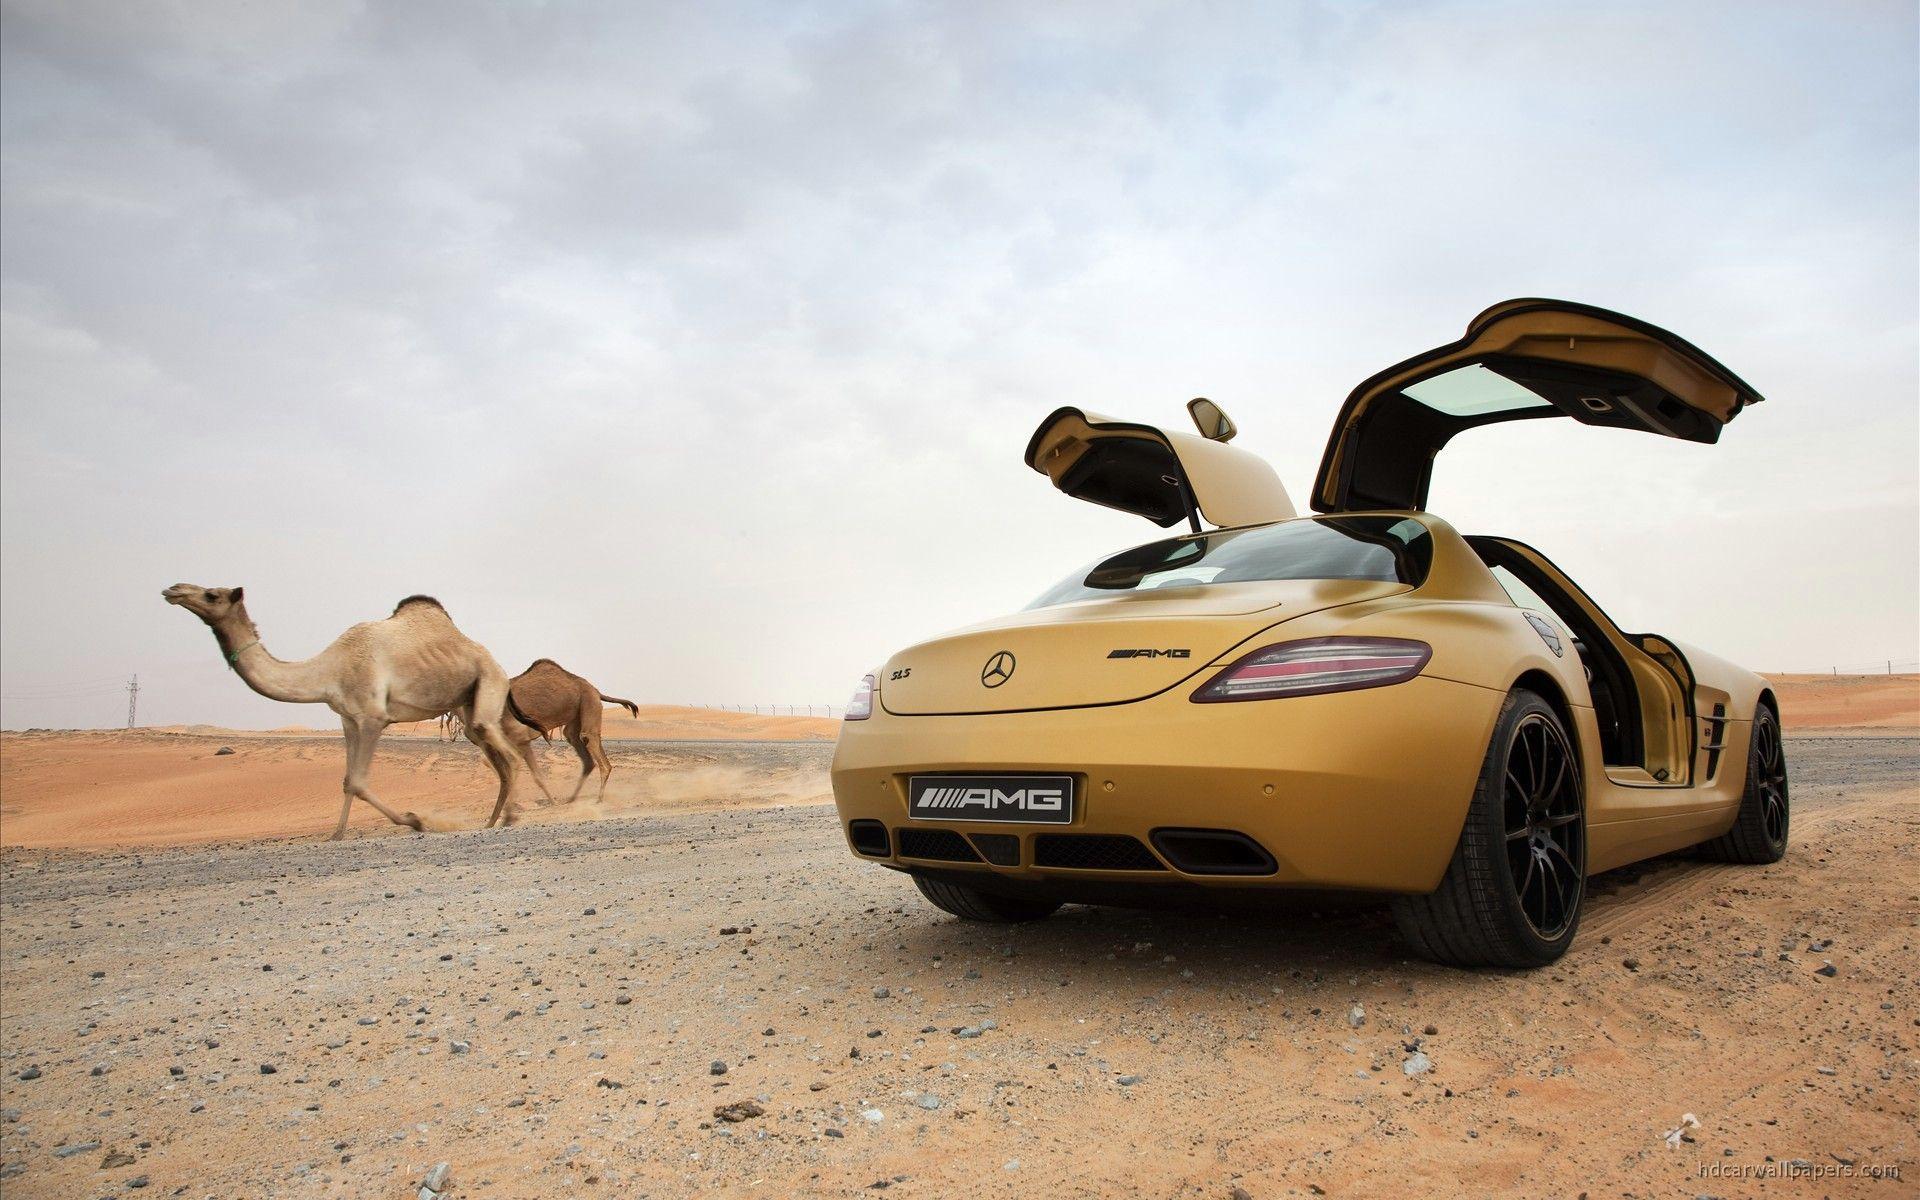 Wallpaper Tagged With GOLD. GOLD Car Wallpaper, Image